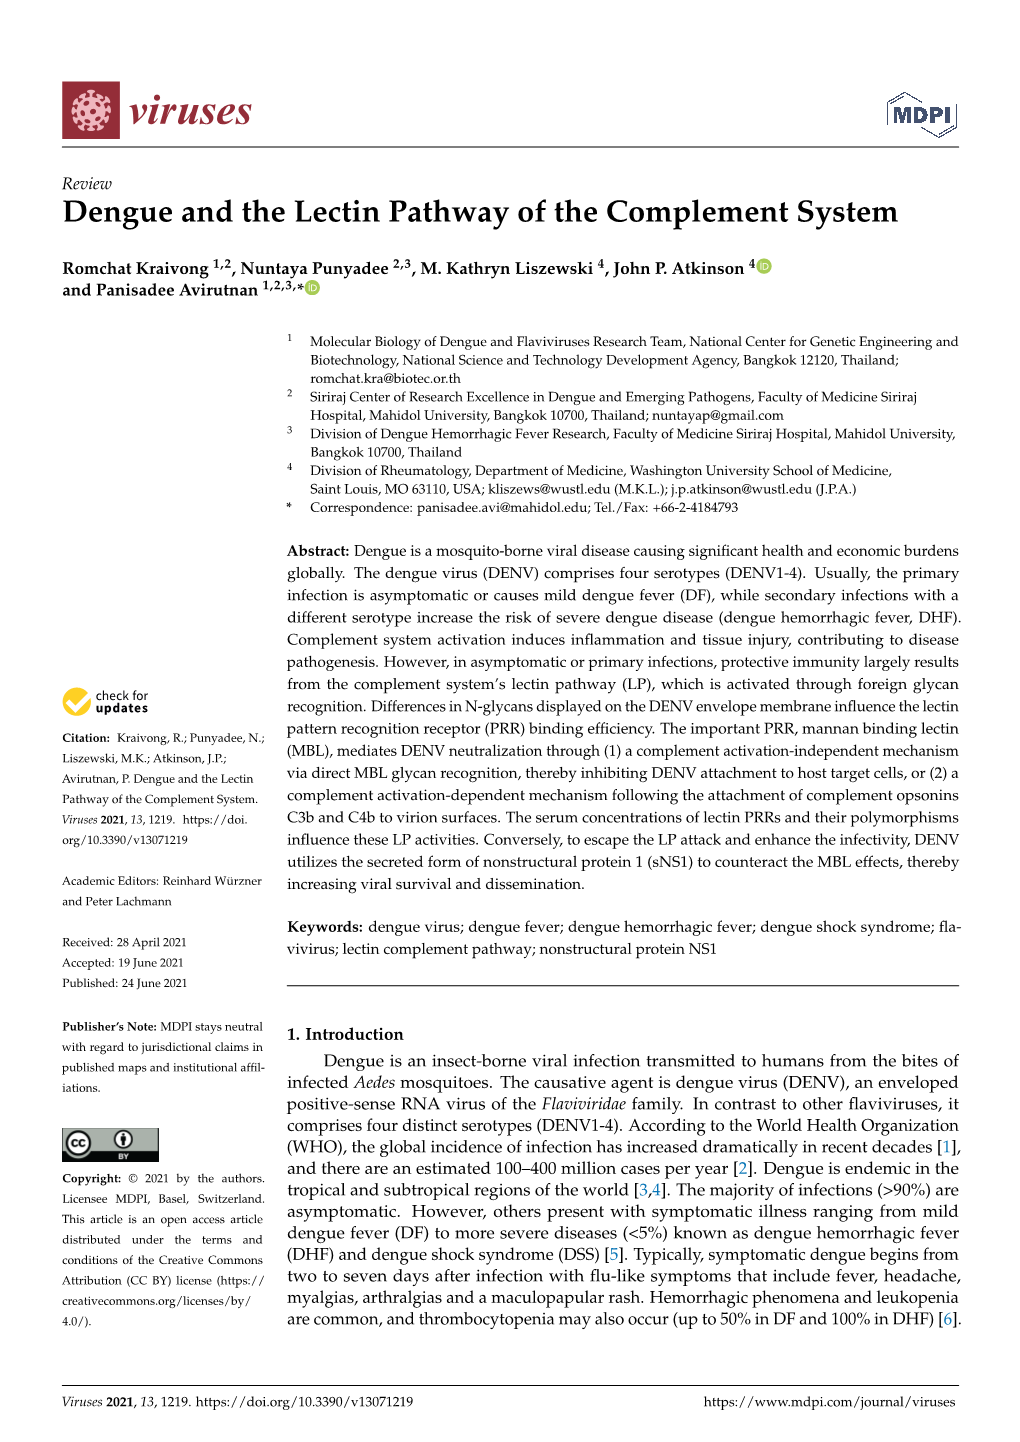 Dengue and the Lectin Pathway of the Complement System